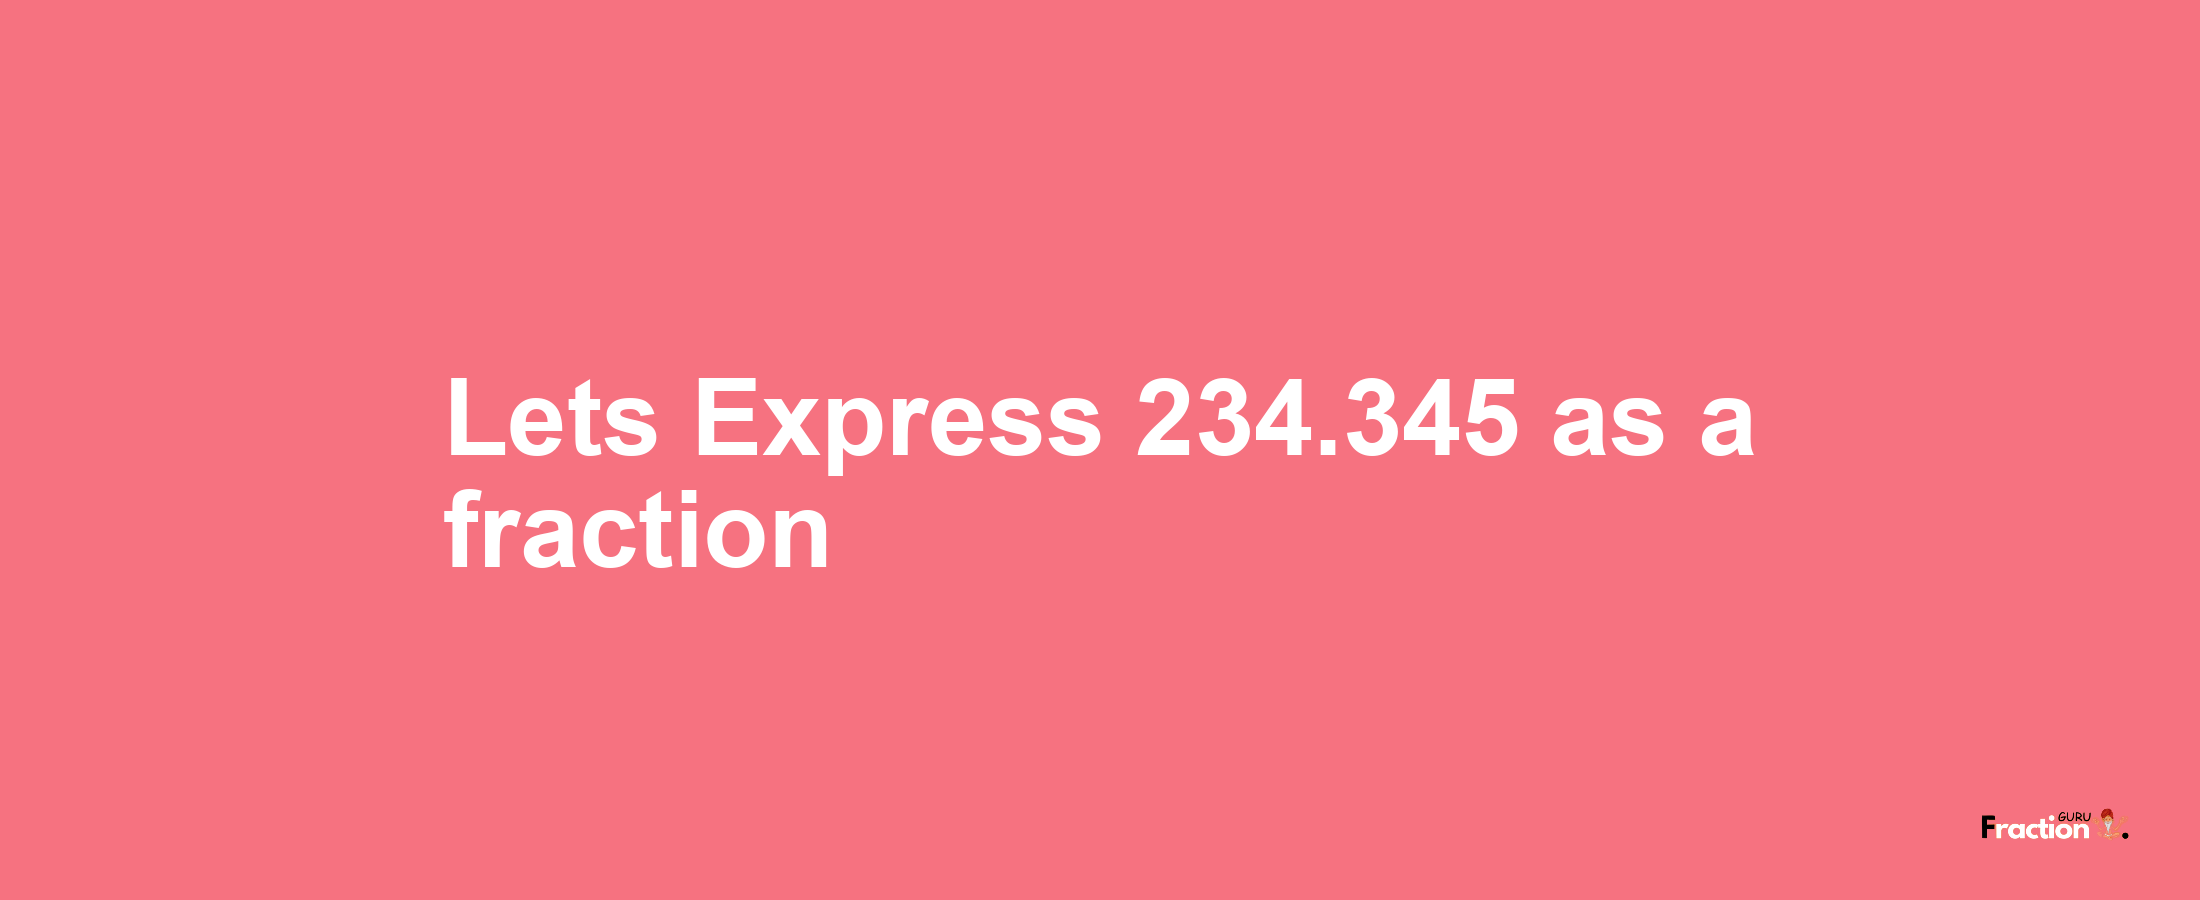 Lets Express 234.345 as afraction